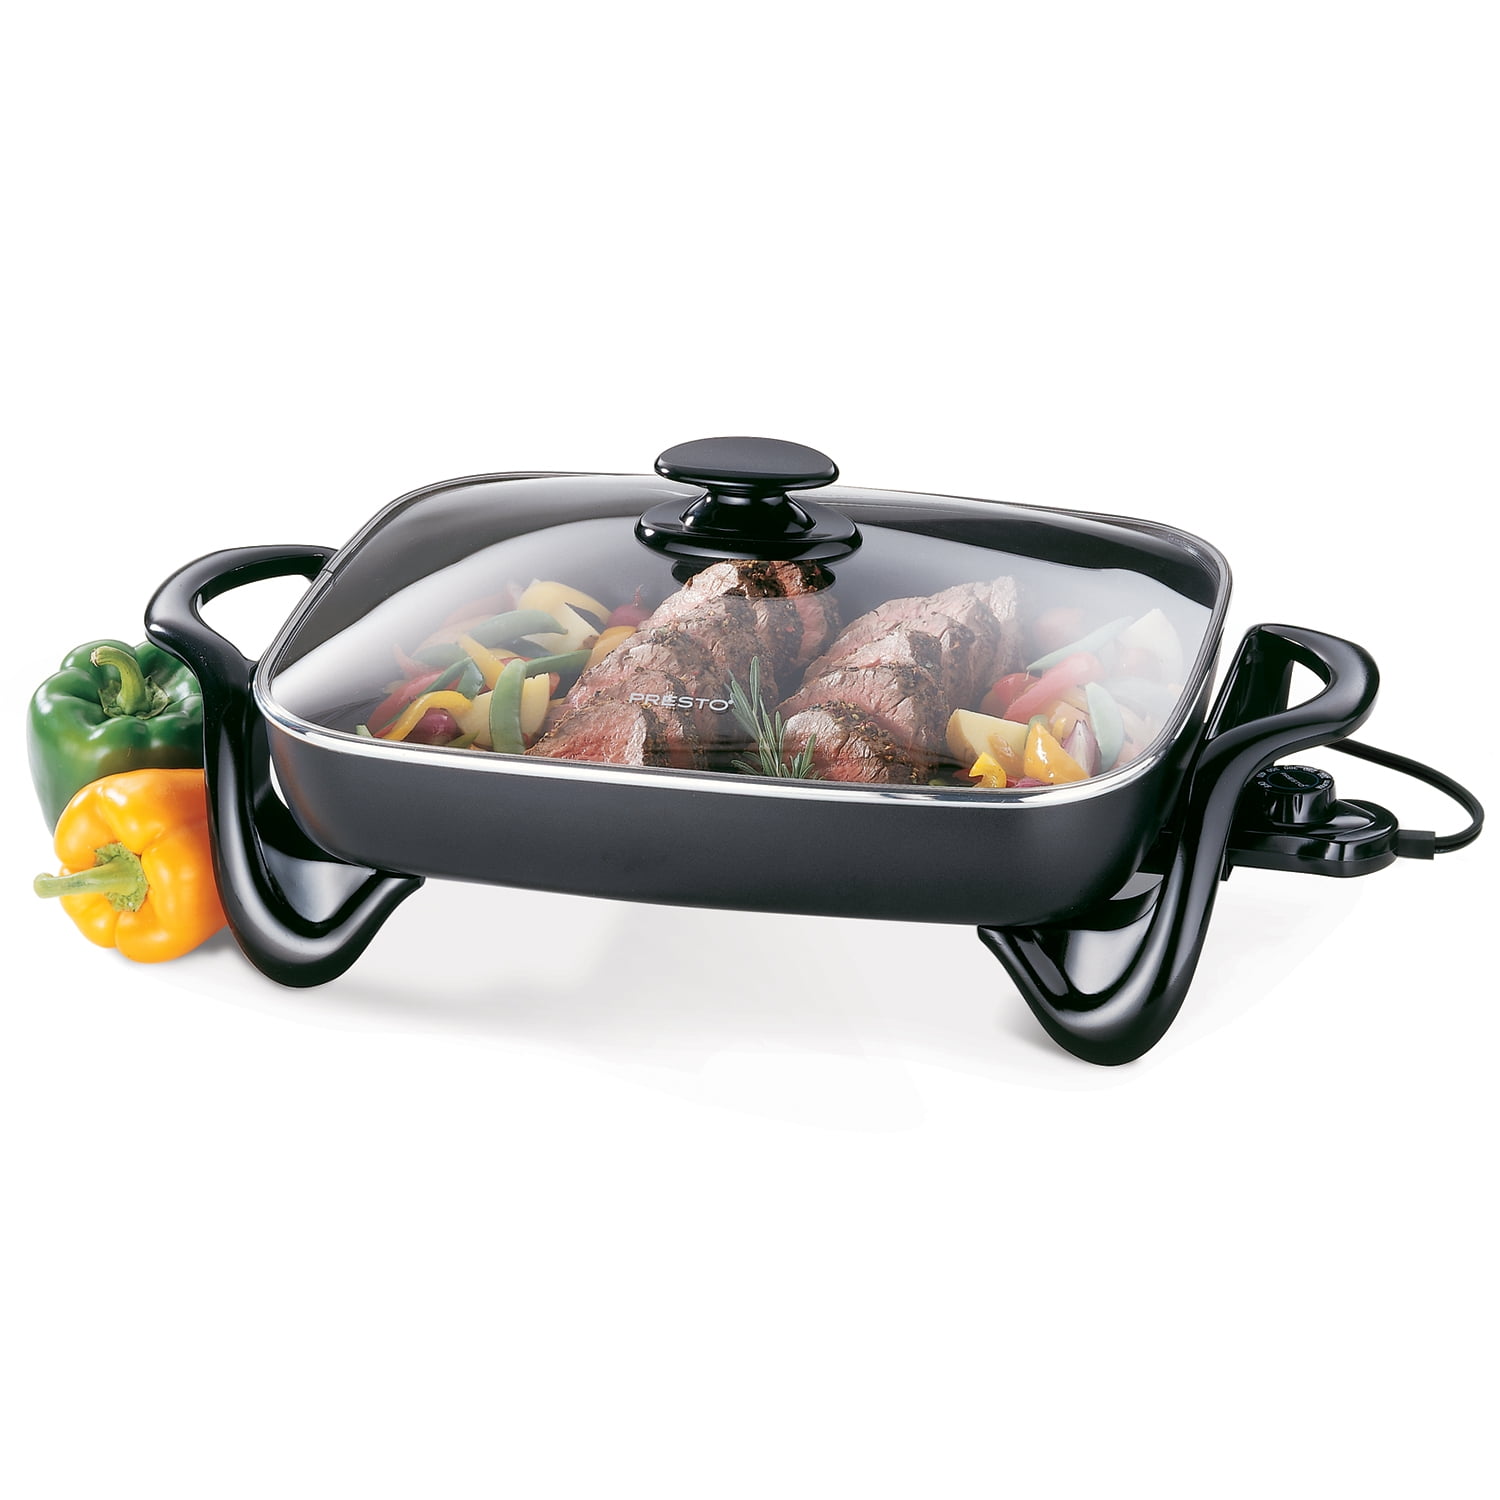 06852 Electric Skillets 16-Inch With Glass Cover